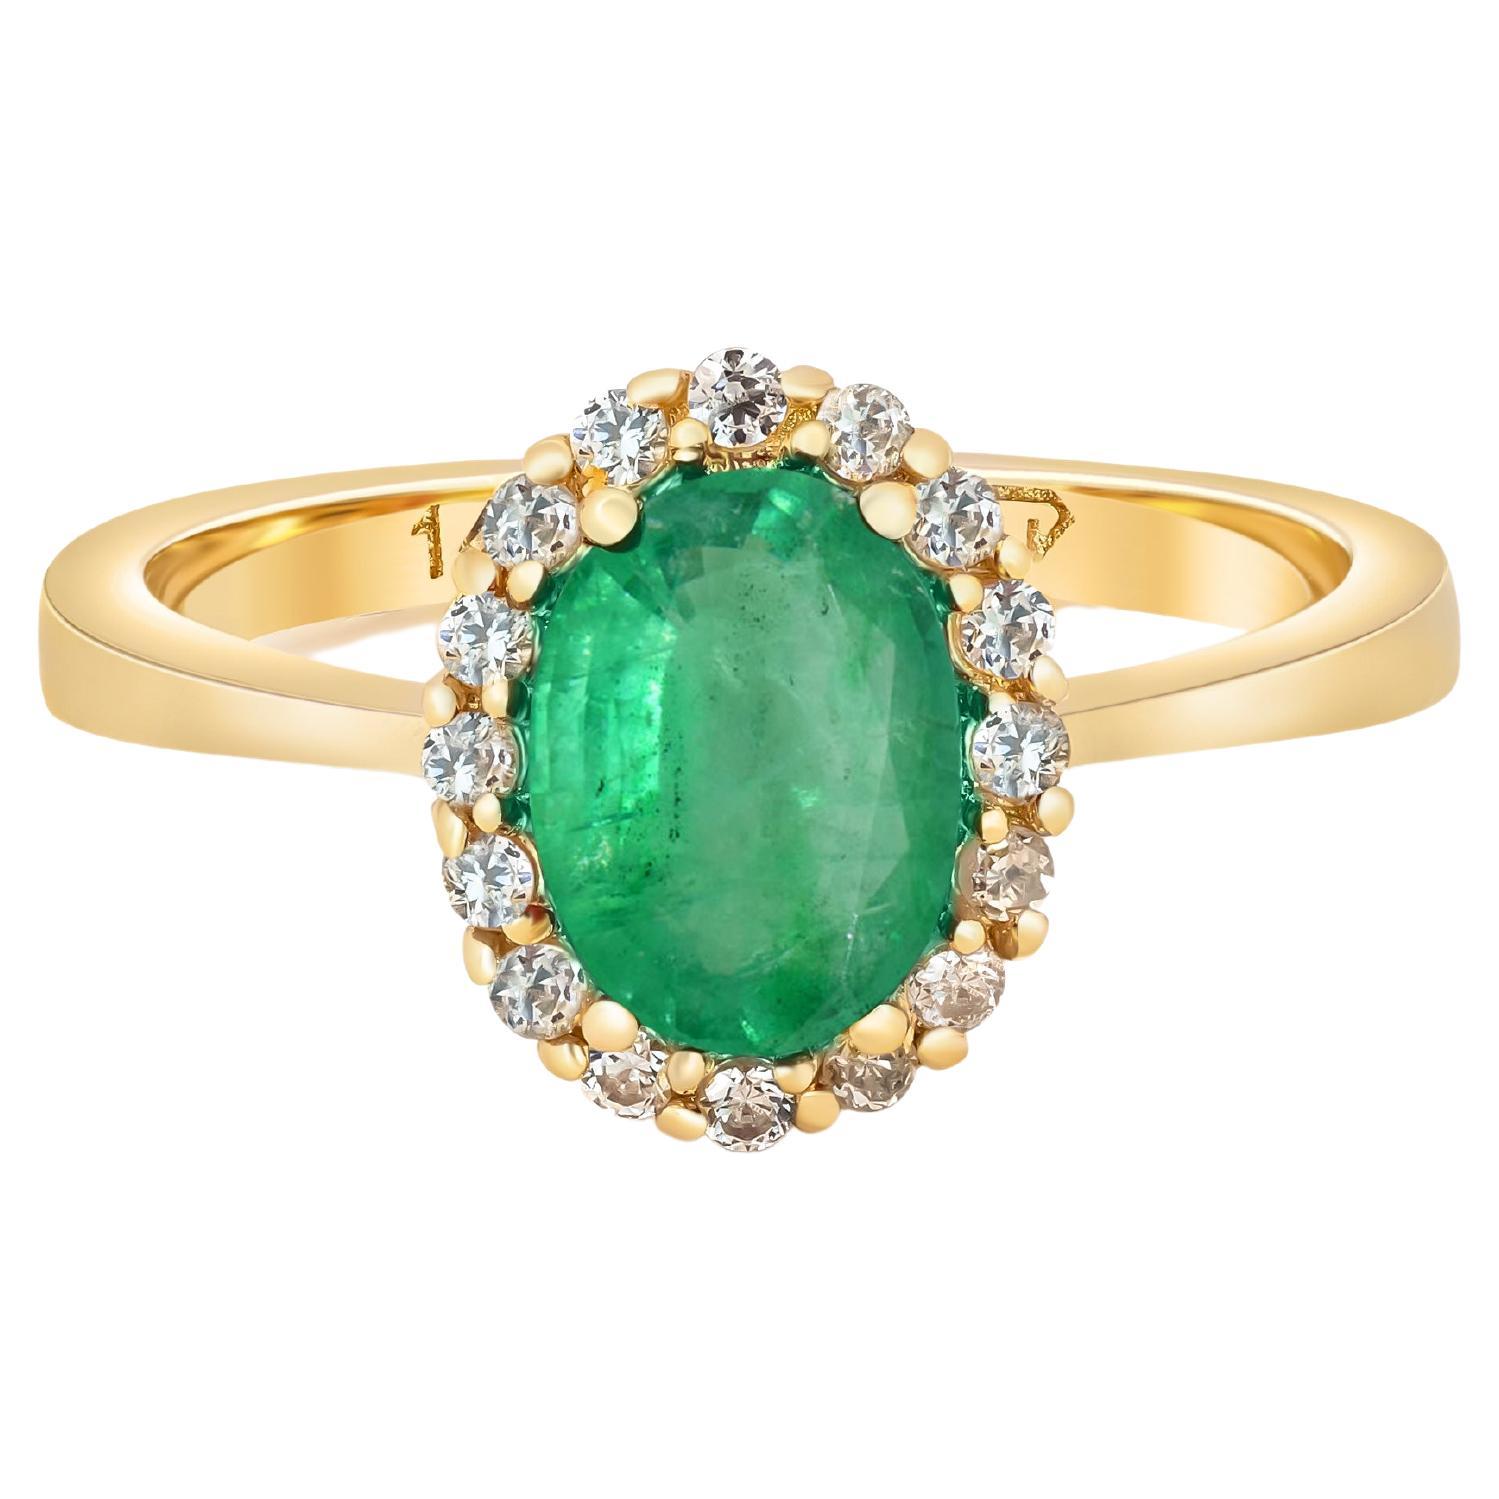 Emerald ring with diamond halo. For Sale